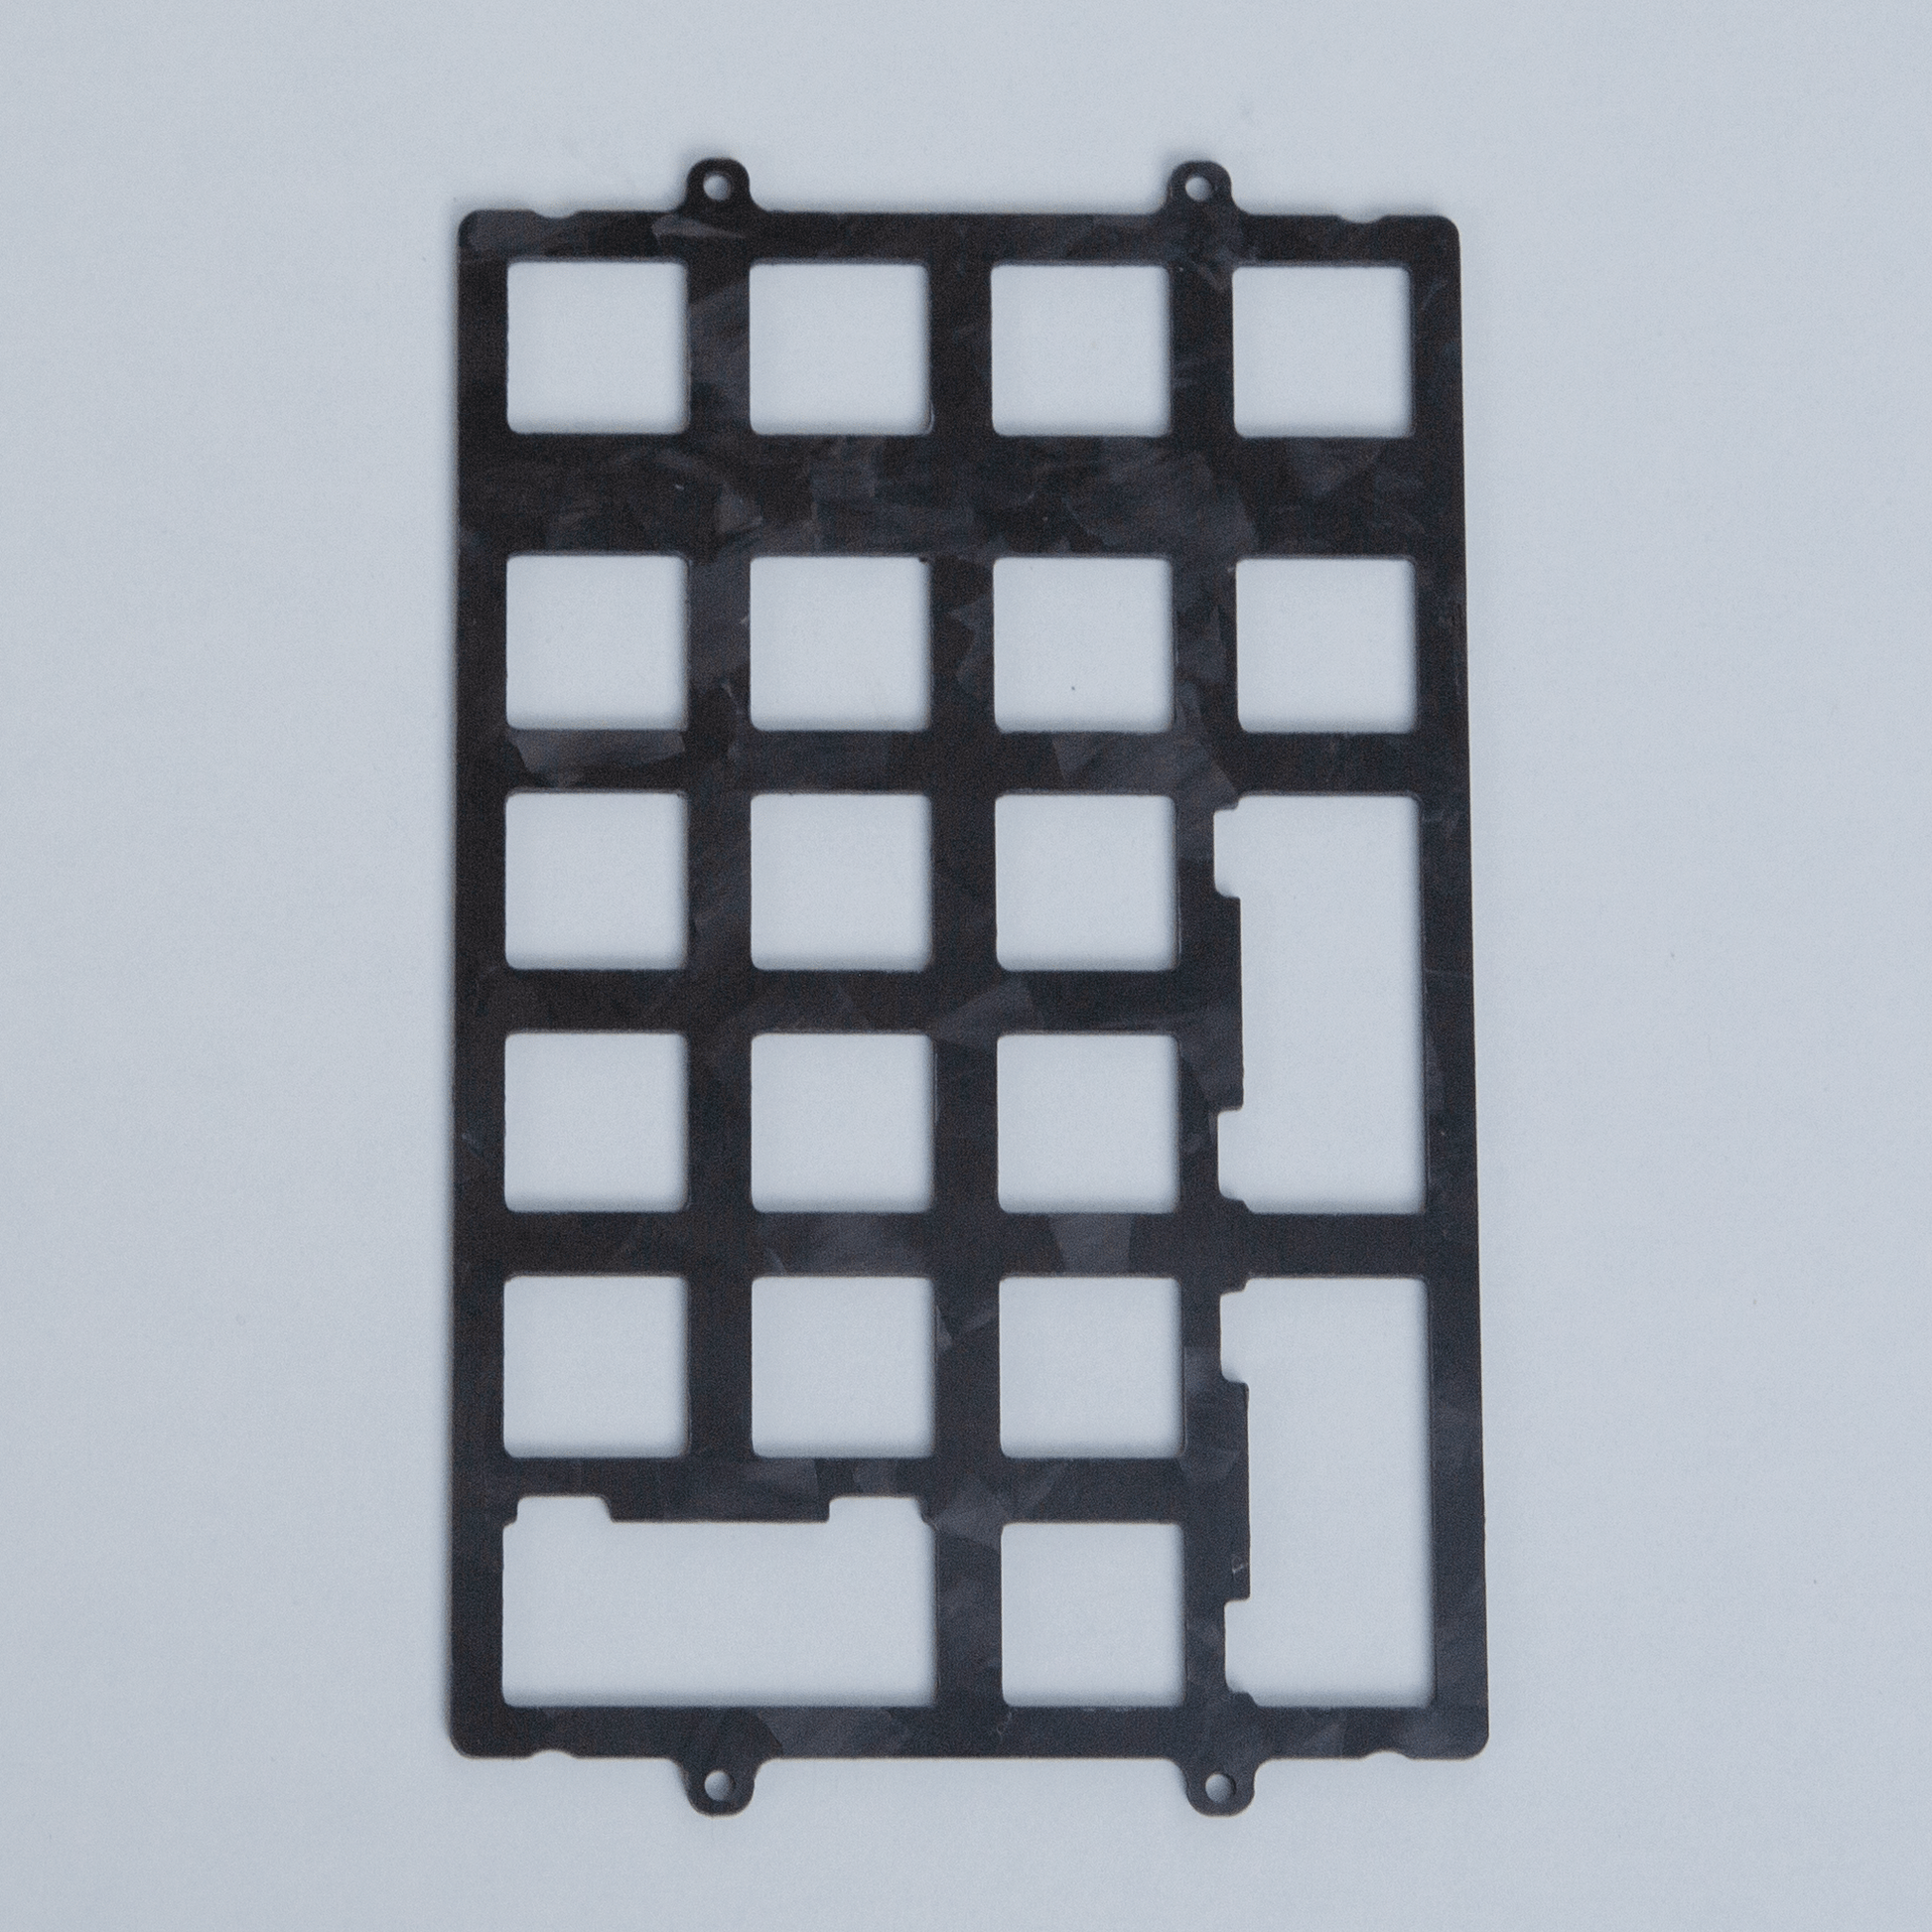 KeebCats UK [EXTRAS] KBDfans KBDpad MKII - Universal Plate Forged Carbon Fibre